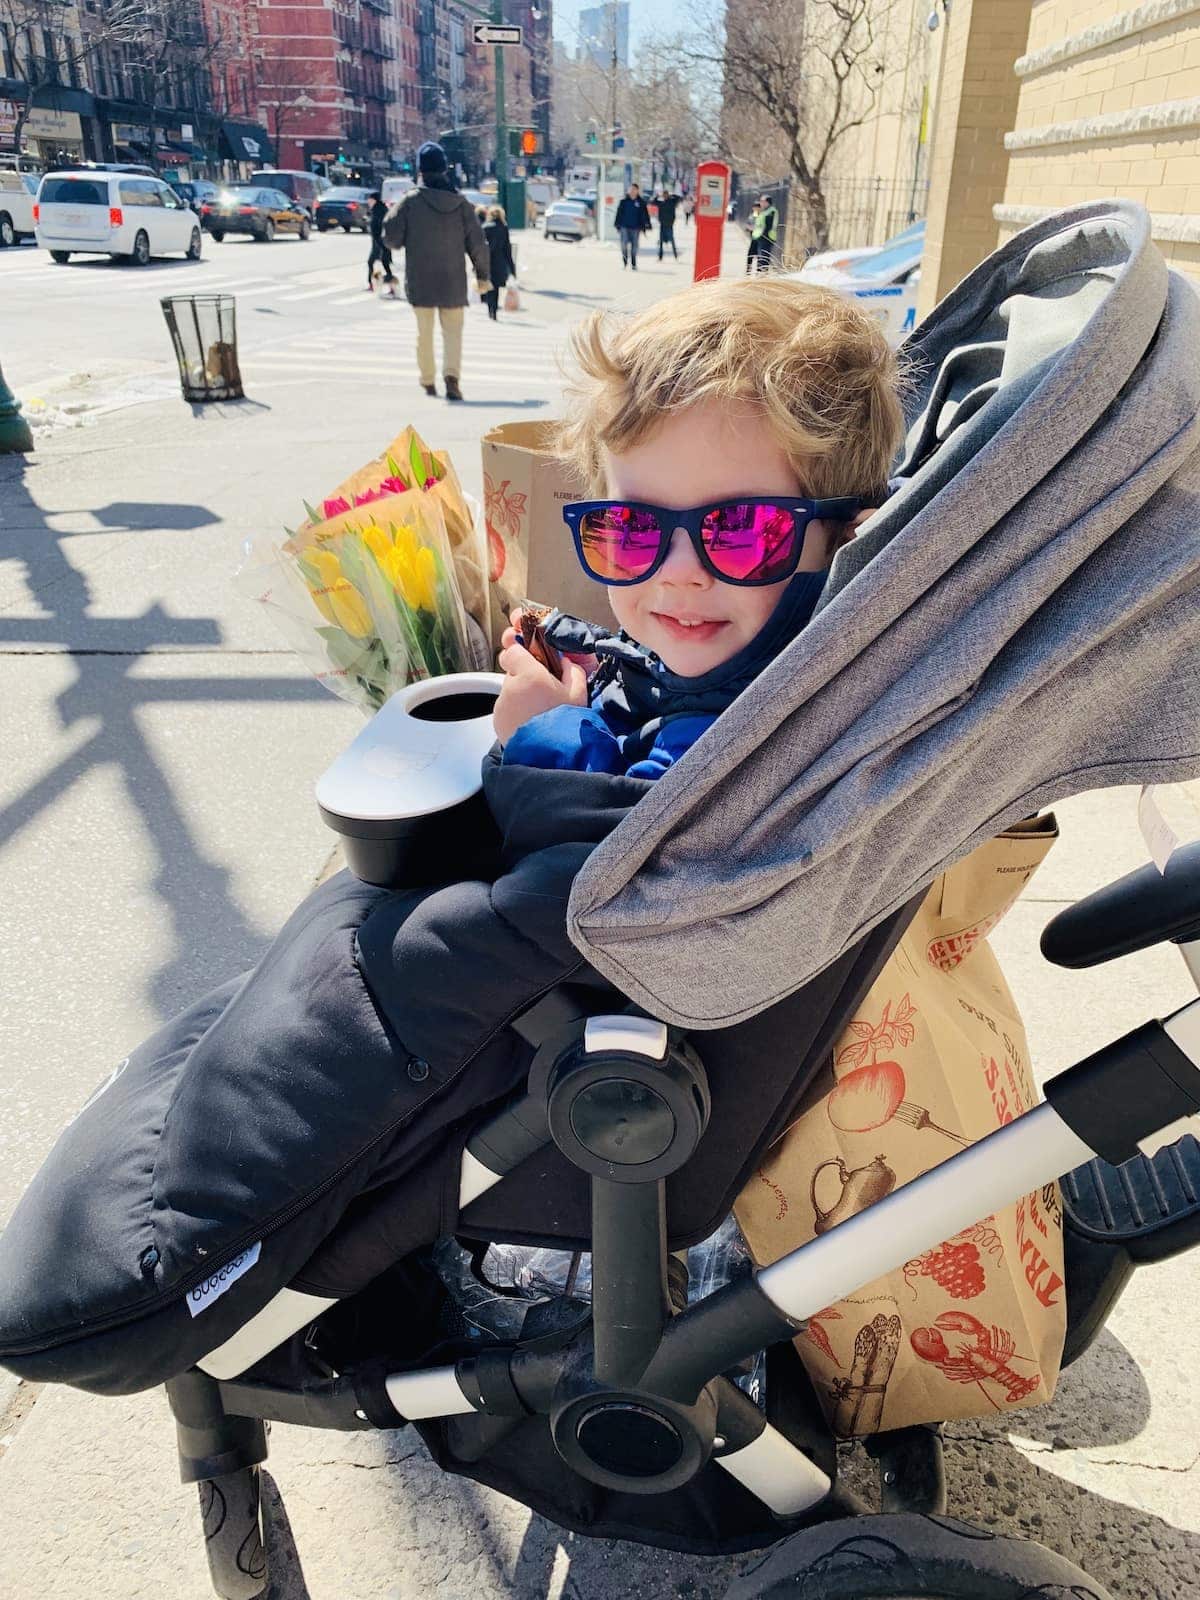 Eddie in the stroller With sunglasses on